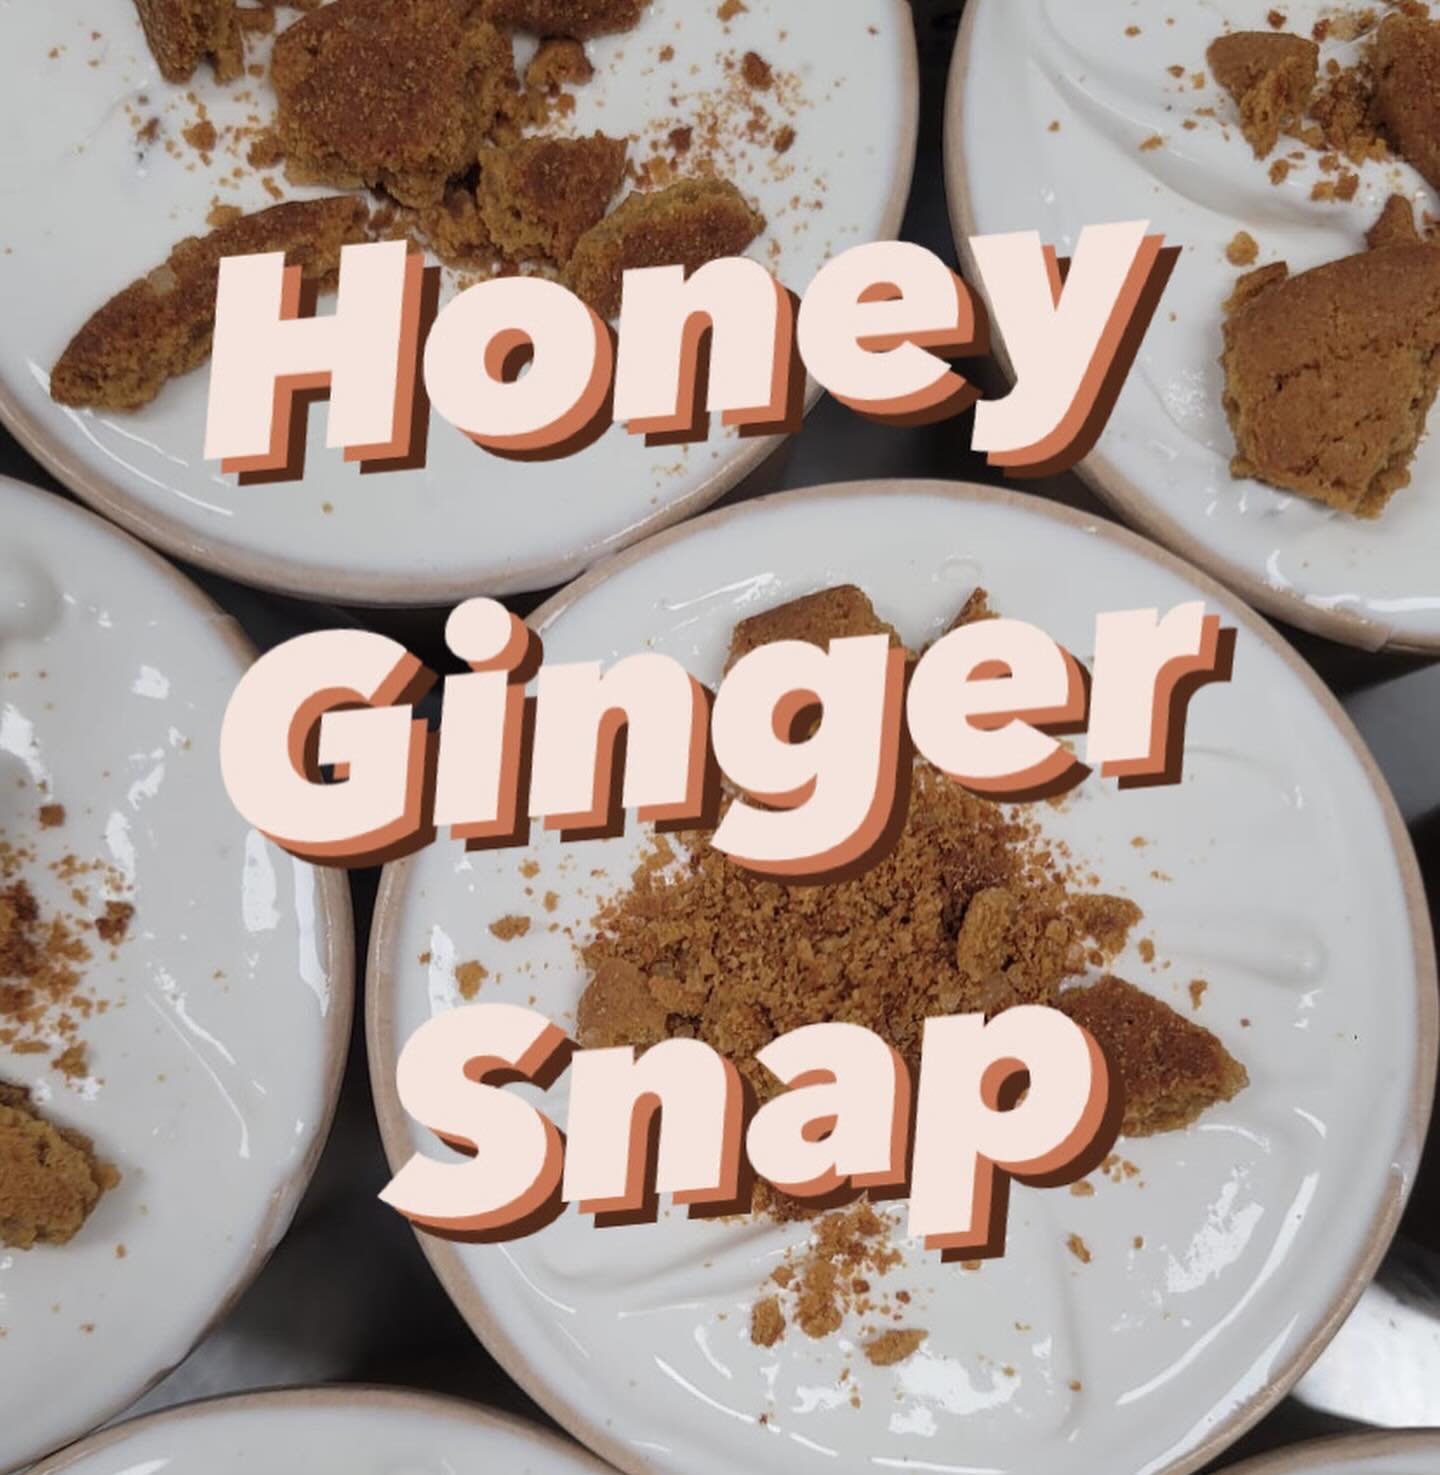 🍯We&rsquo;re excited to share our latest version of HONEY GINGER SNAP, this time made with local honey produced by our friends at @philadelphiabee!🐝 If you follow us regularly, you know that the last round of honey came from Pete&rsquo;s dad who&rs